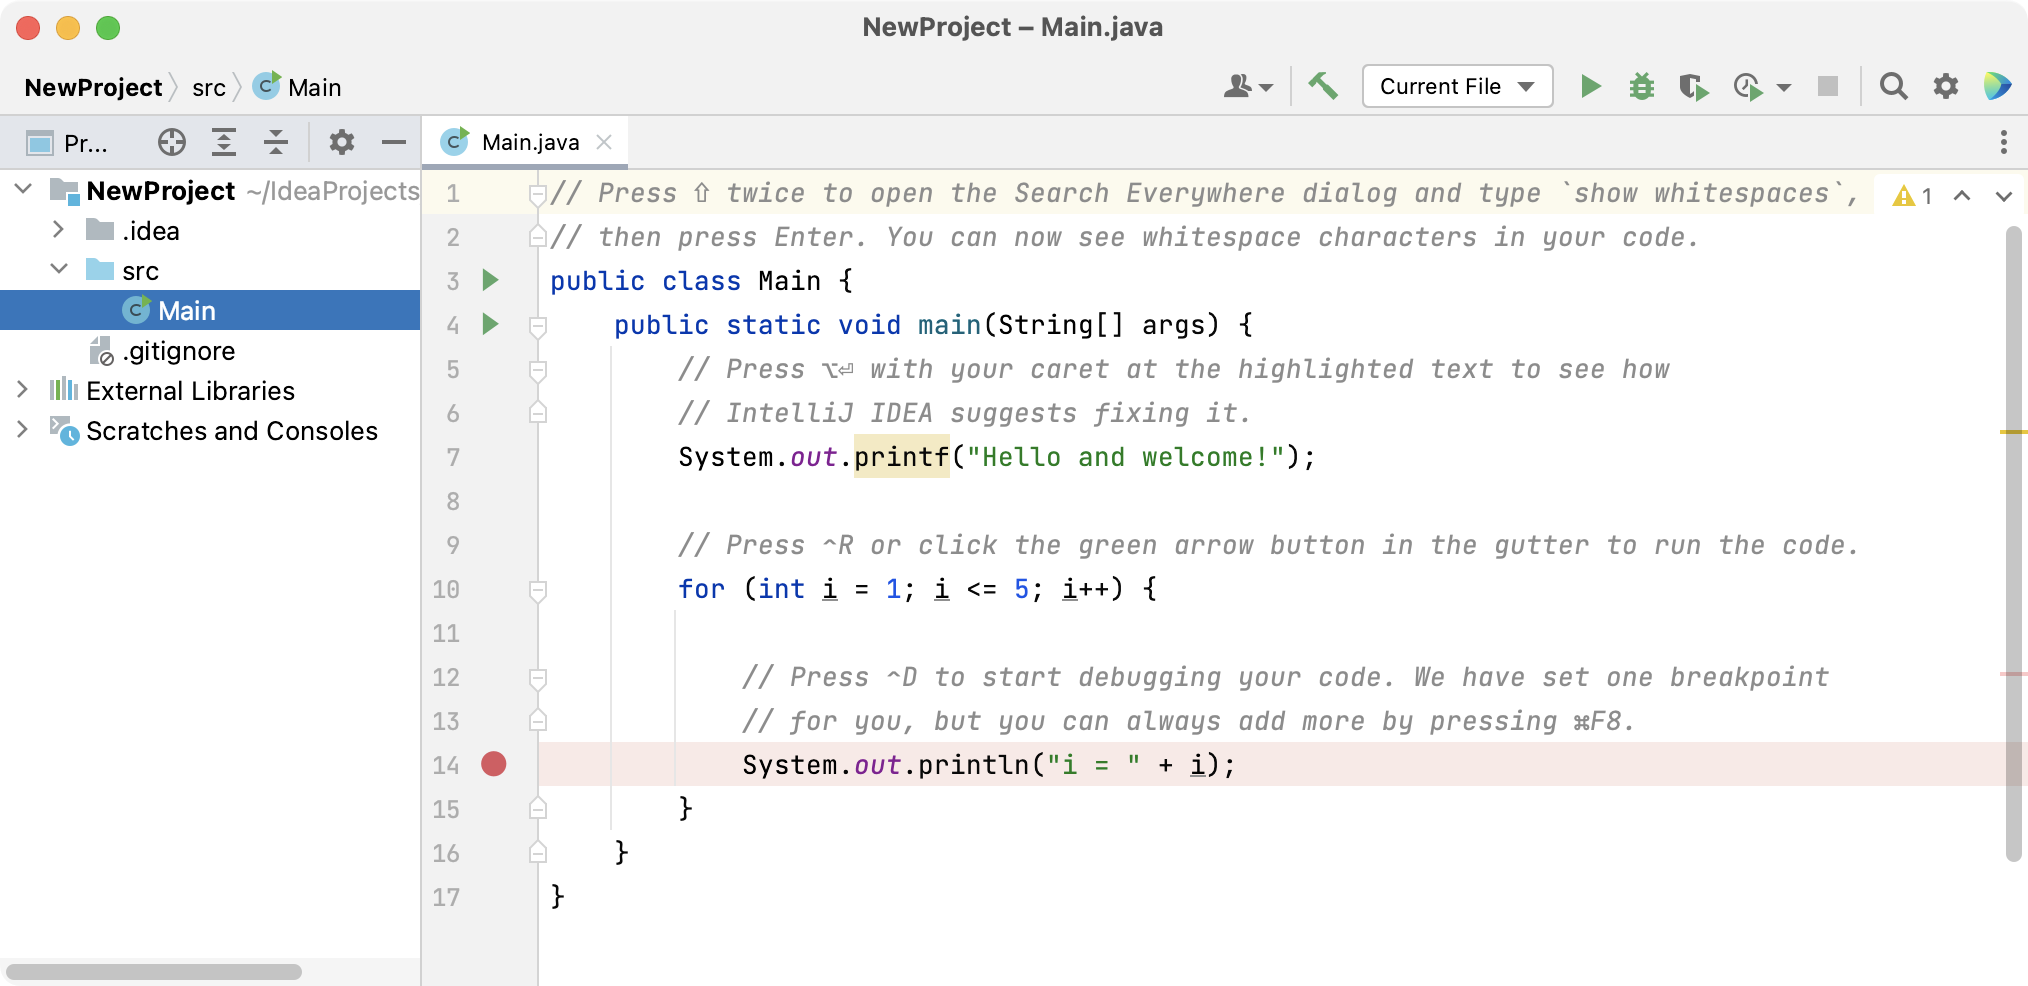 New Java project with onboarding tips in the editor